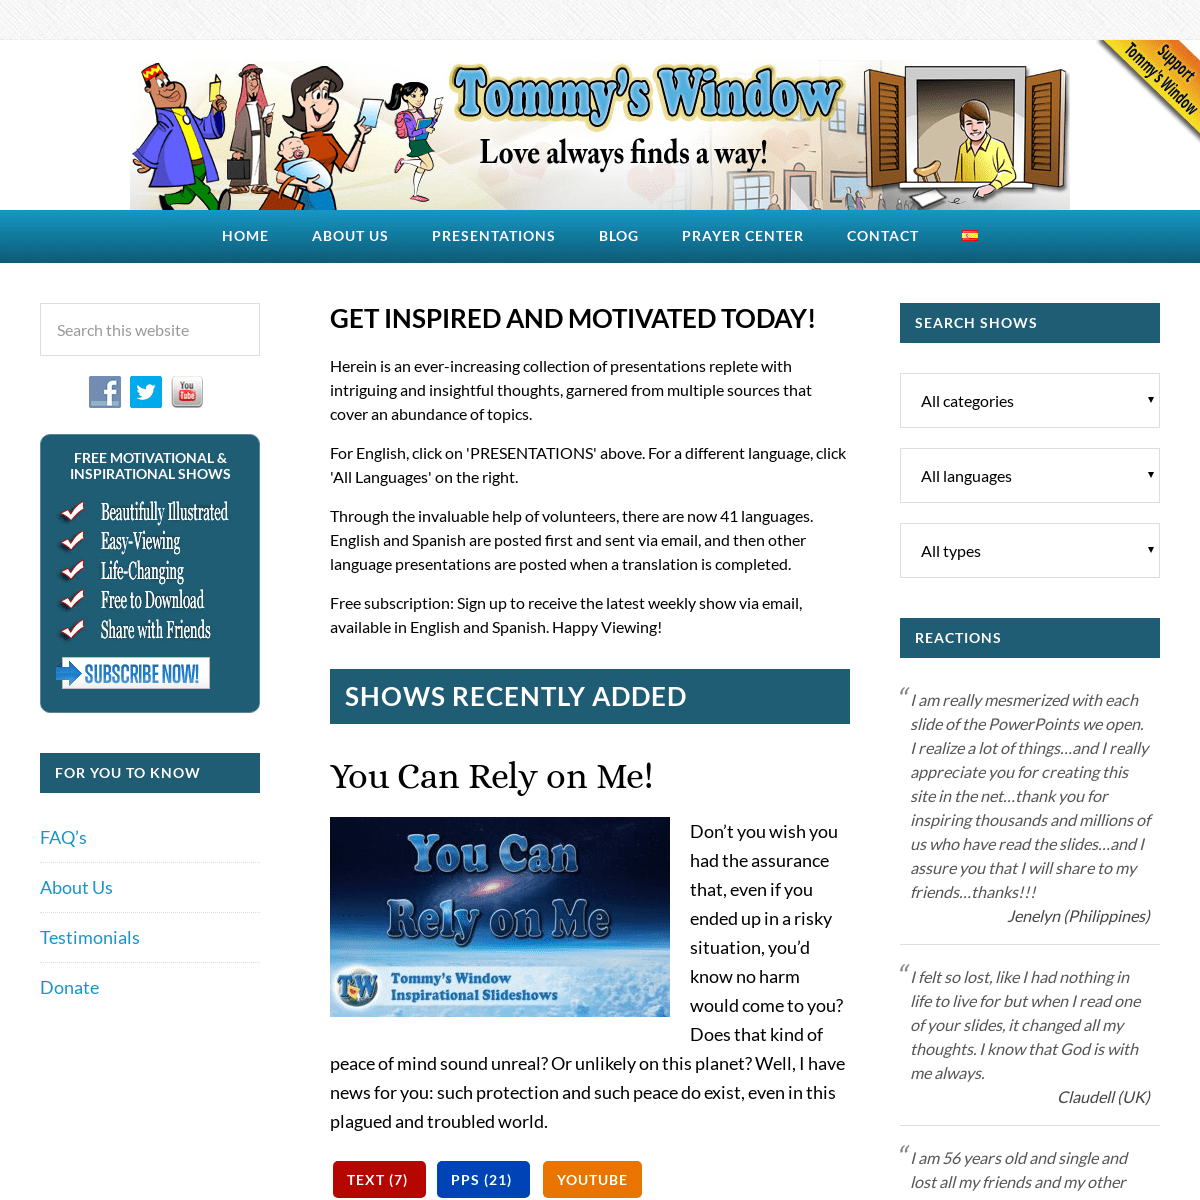 A complete backup of tommyswindow.com